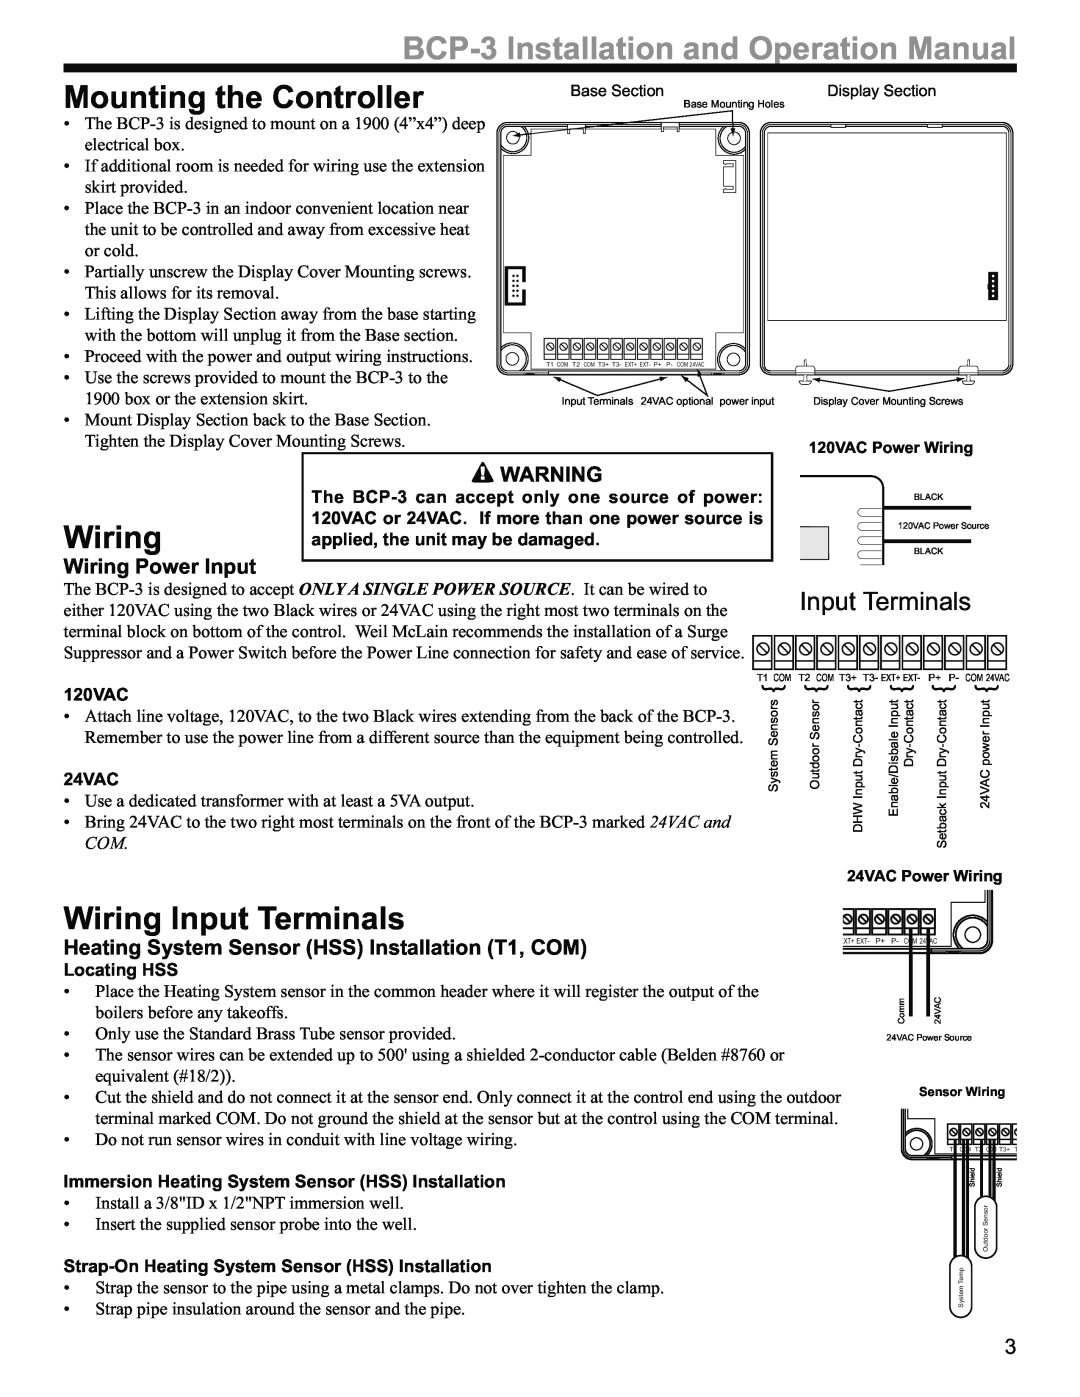 Weil-McLain BCP-3 manual Mounting the Controller, Wiring Input Terminals, Wiring Power Input 